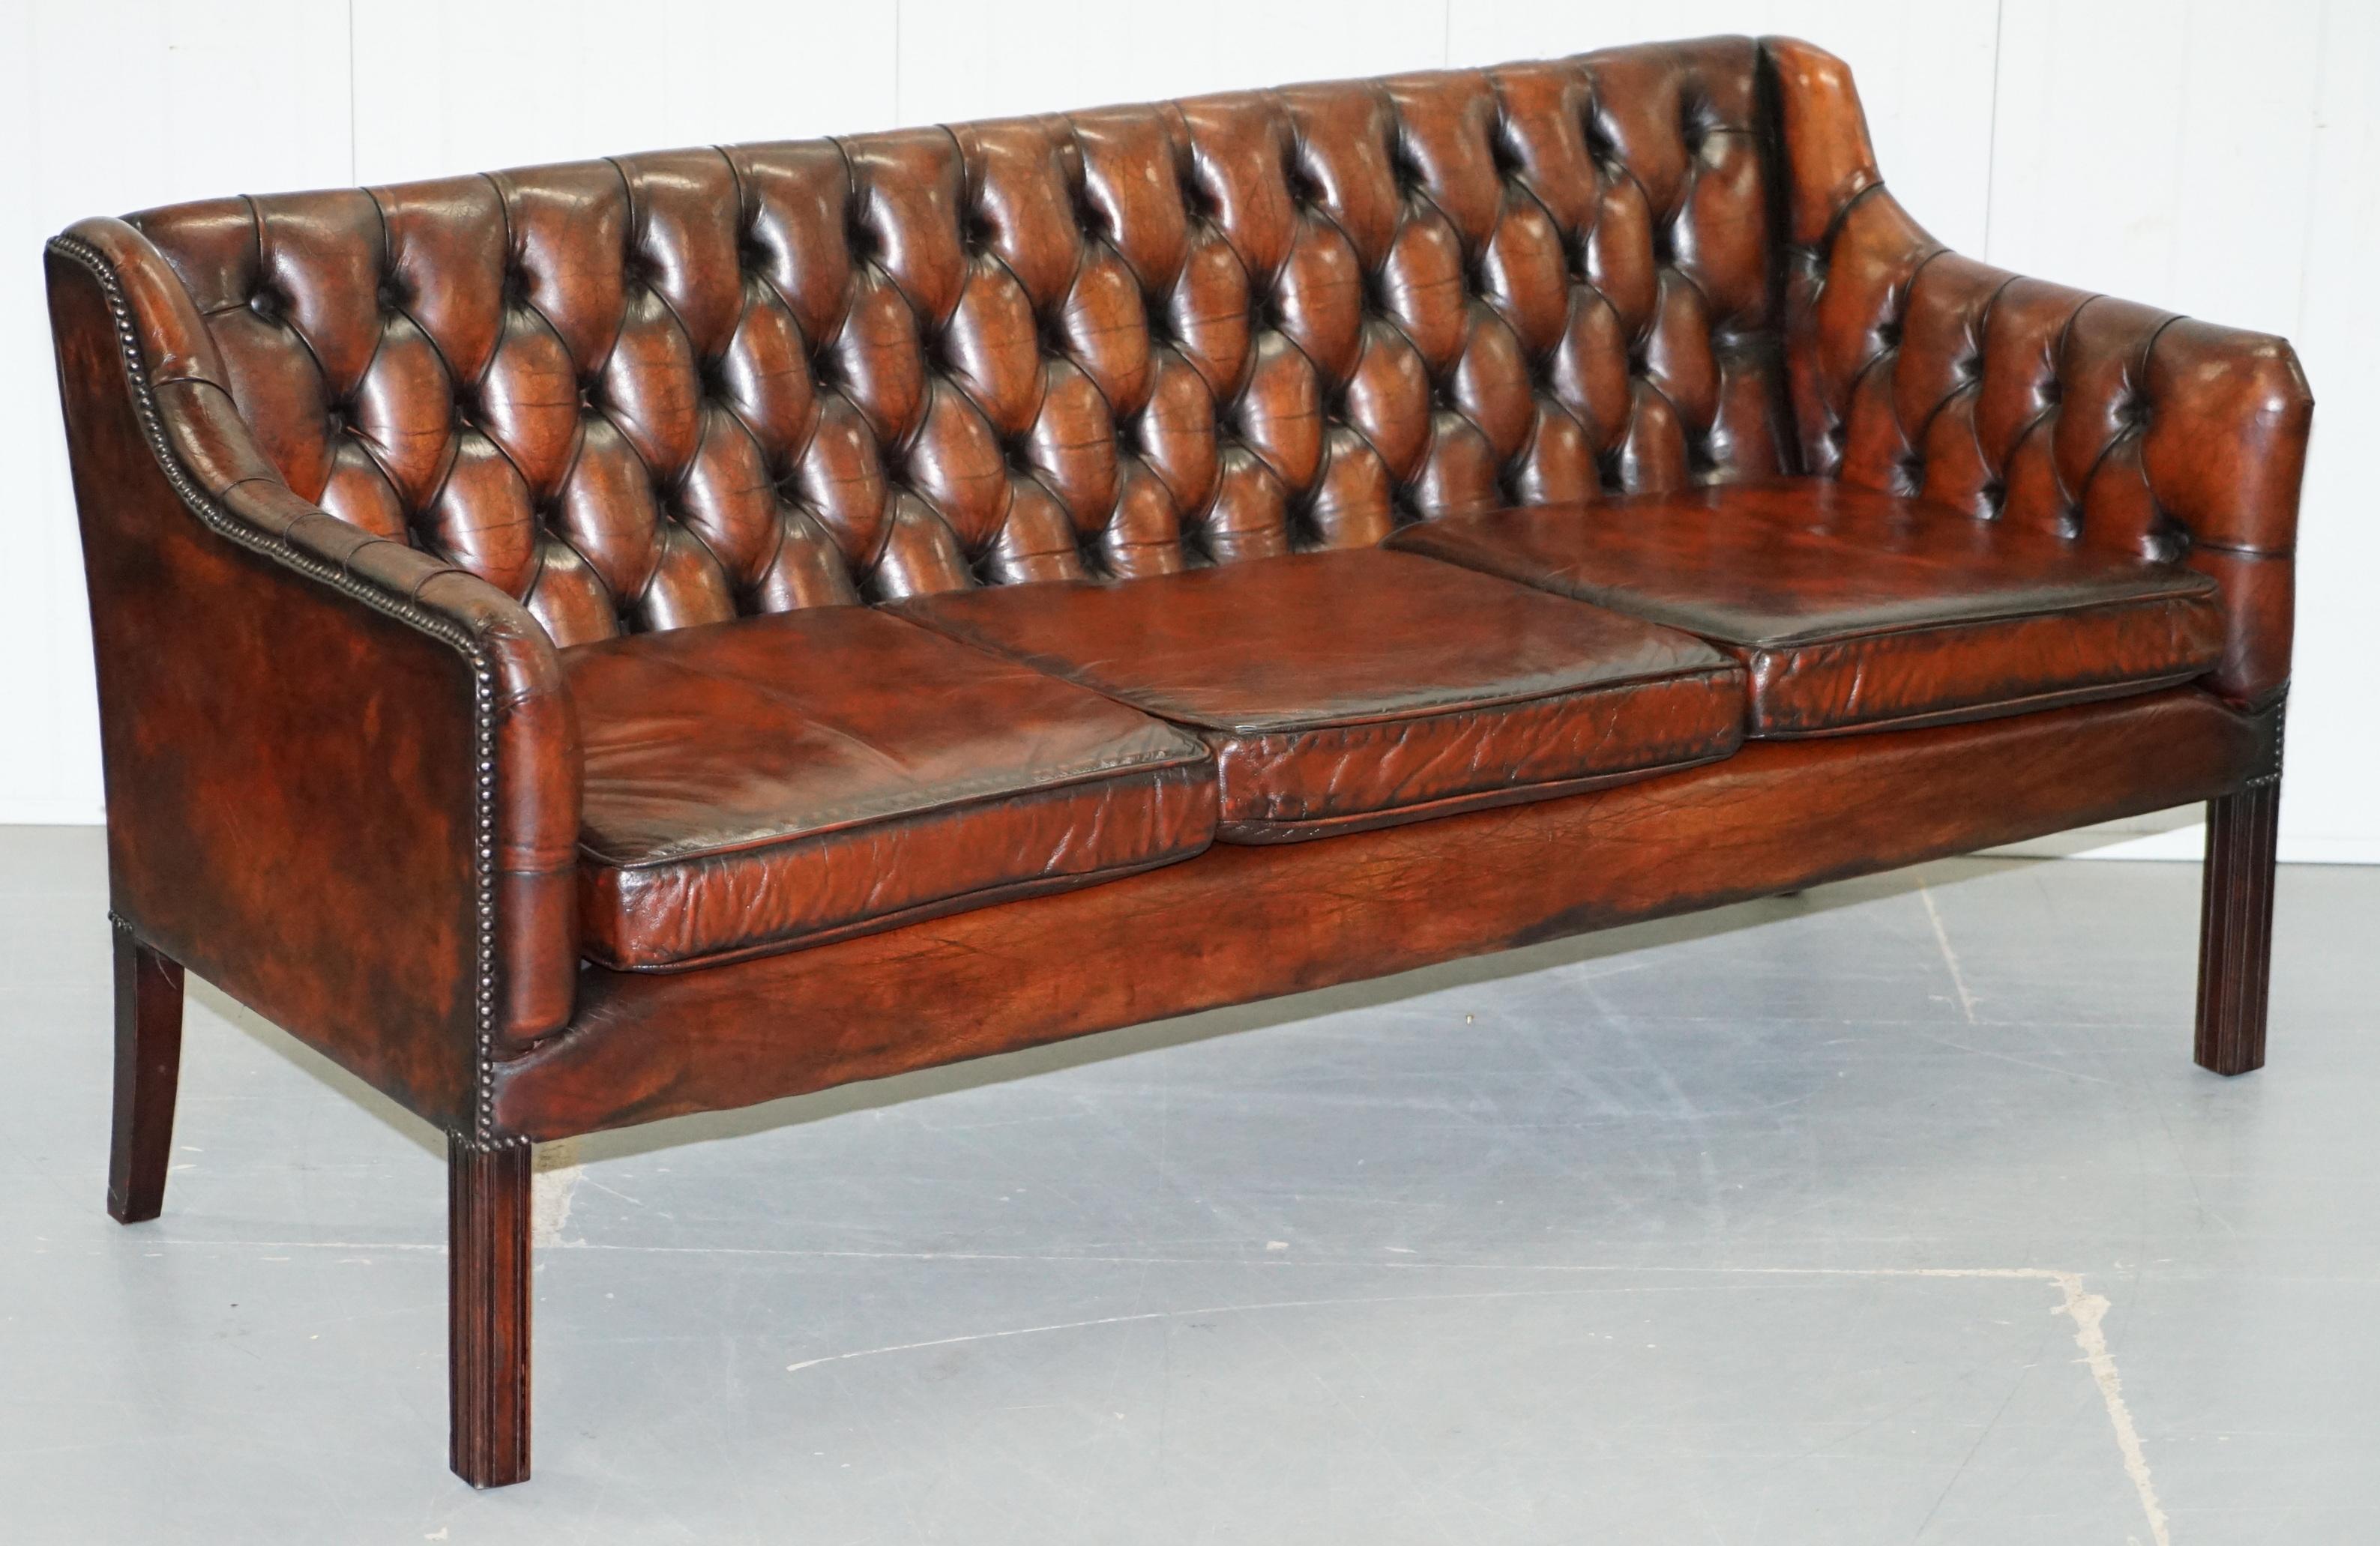 We are delighted to offer for sale this very rare vintage circa 1960s Chesterfield Gun Suite which has been fully restored to this lovely Cigar brown colour

I work with Luxury Chesterfield sofas and armchairs and have done for years, the Gun